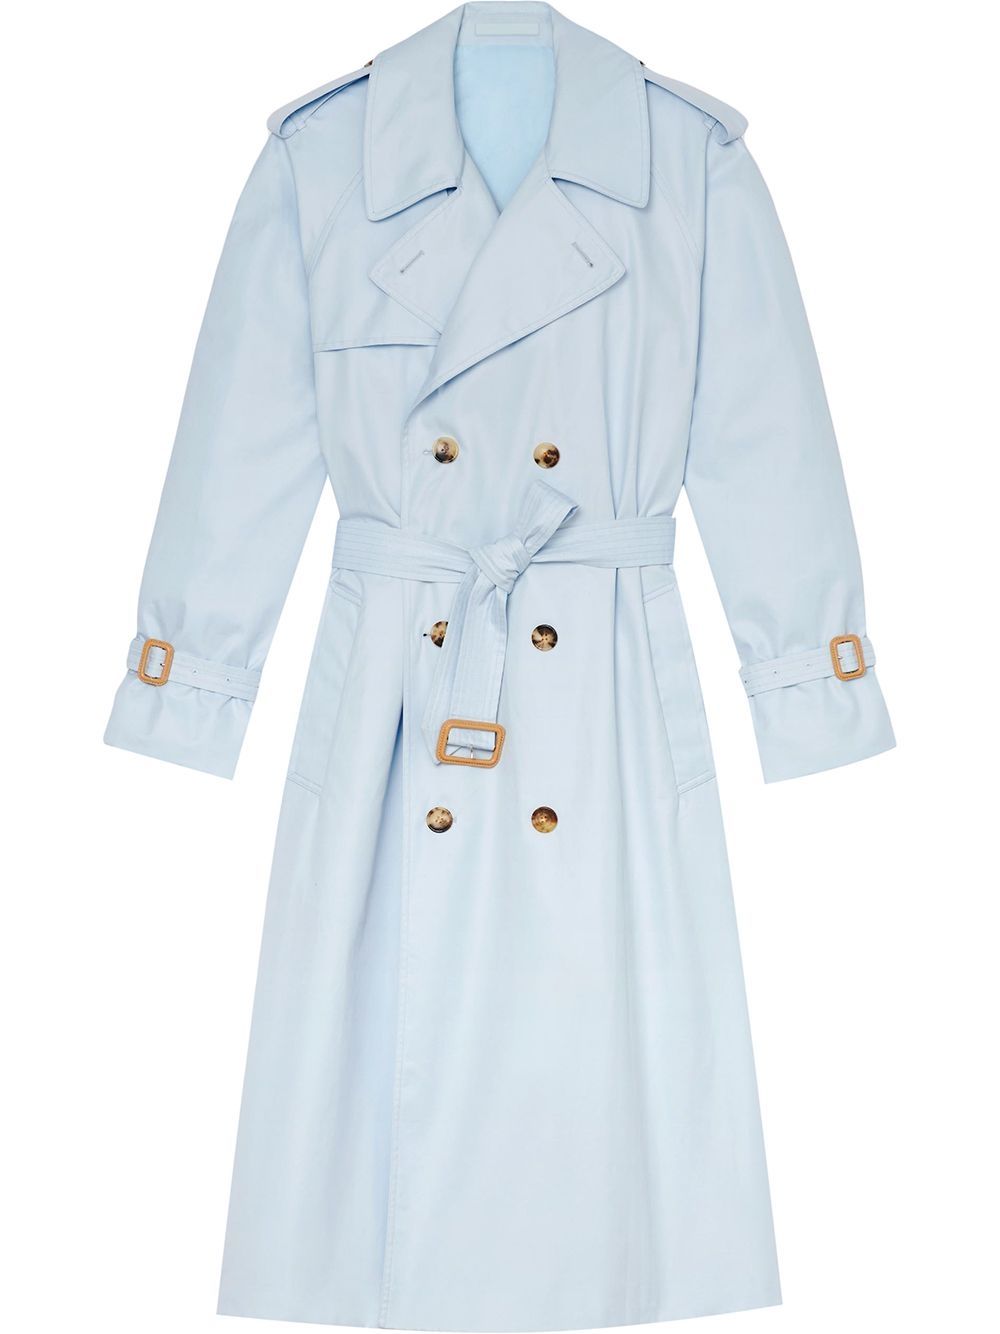 WARDROBE.NYC Belted Trench Coat - Farfetch